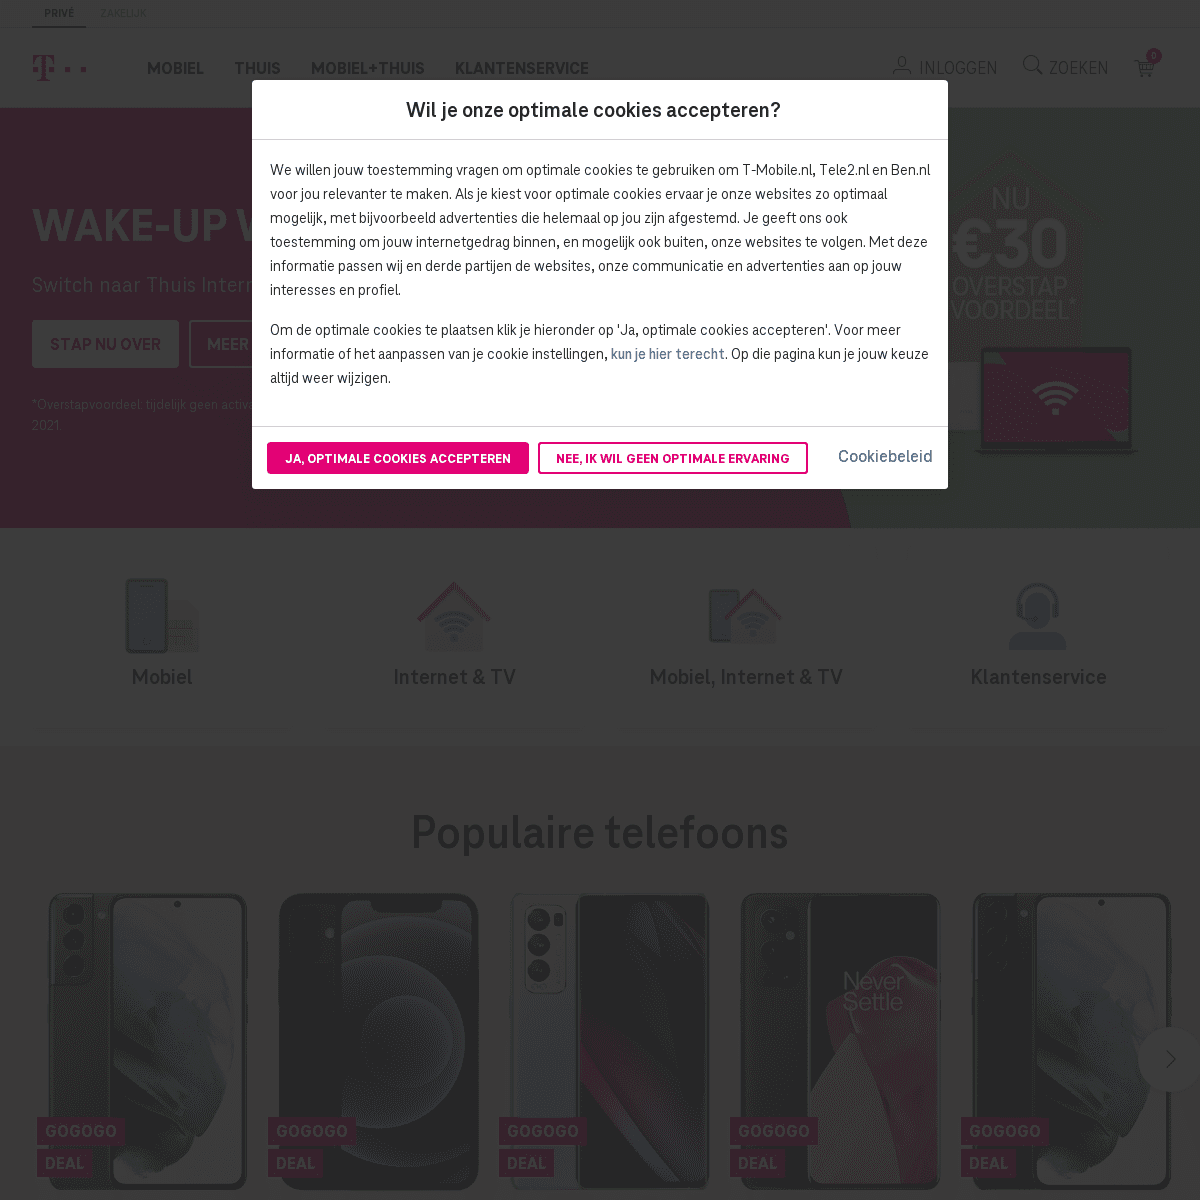 A complete backup of https://t-mobile.nl